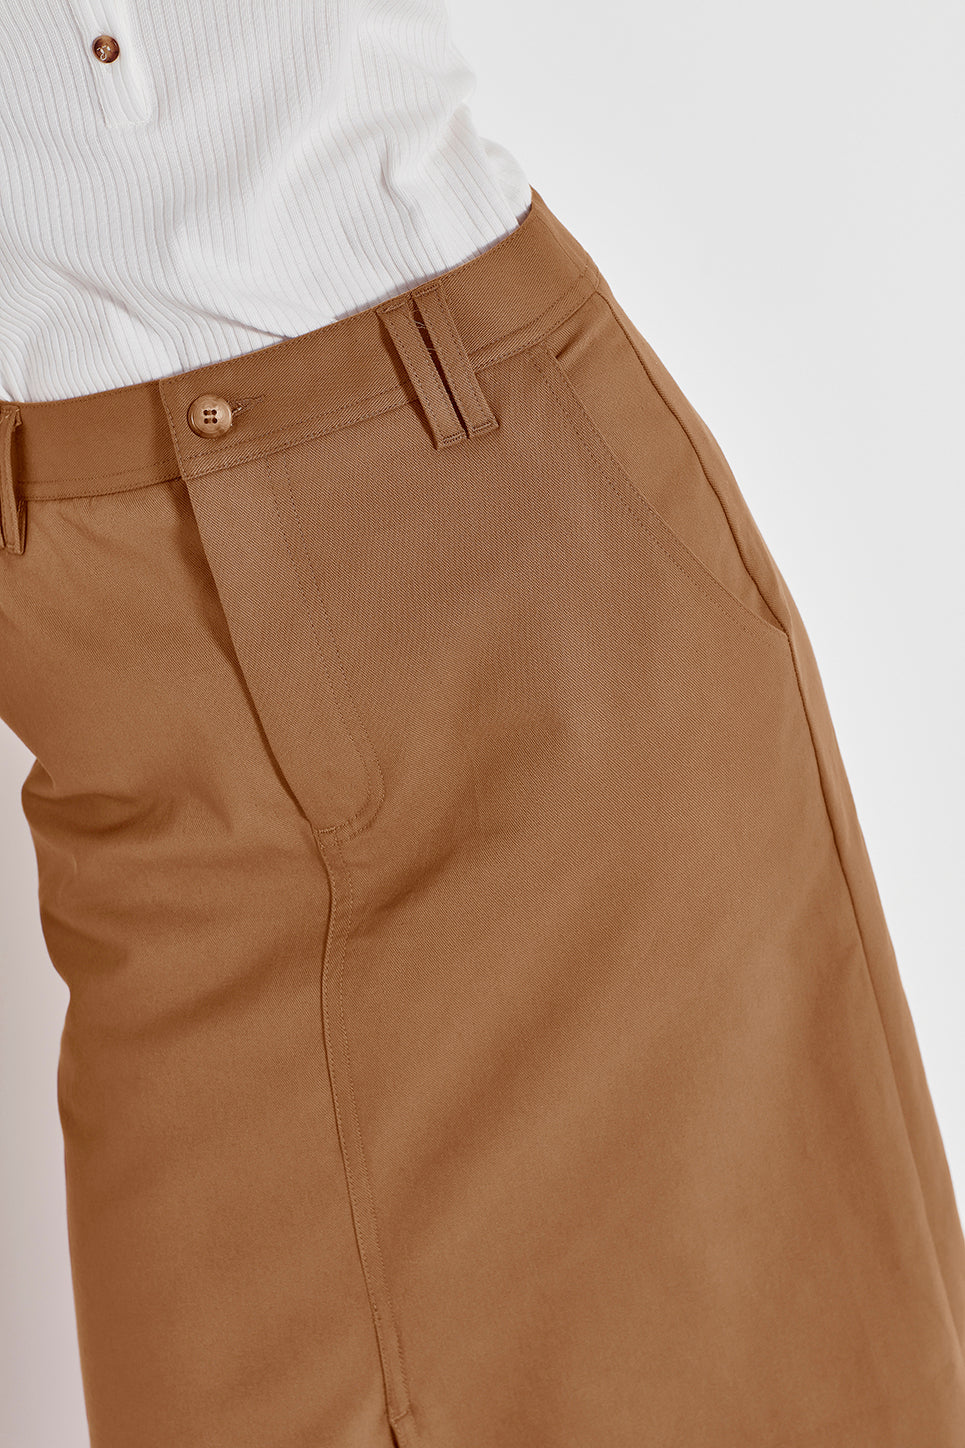 The Dryden Skirt in Tobacco